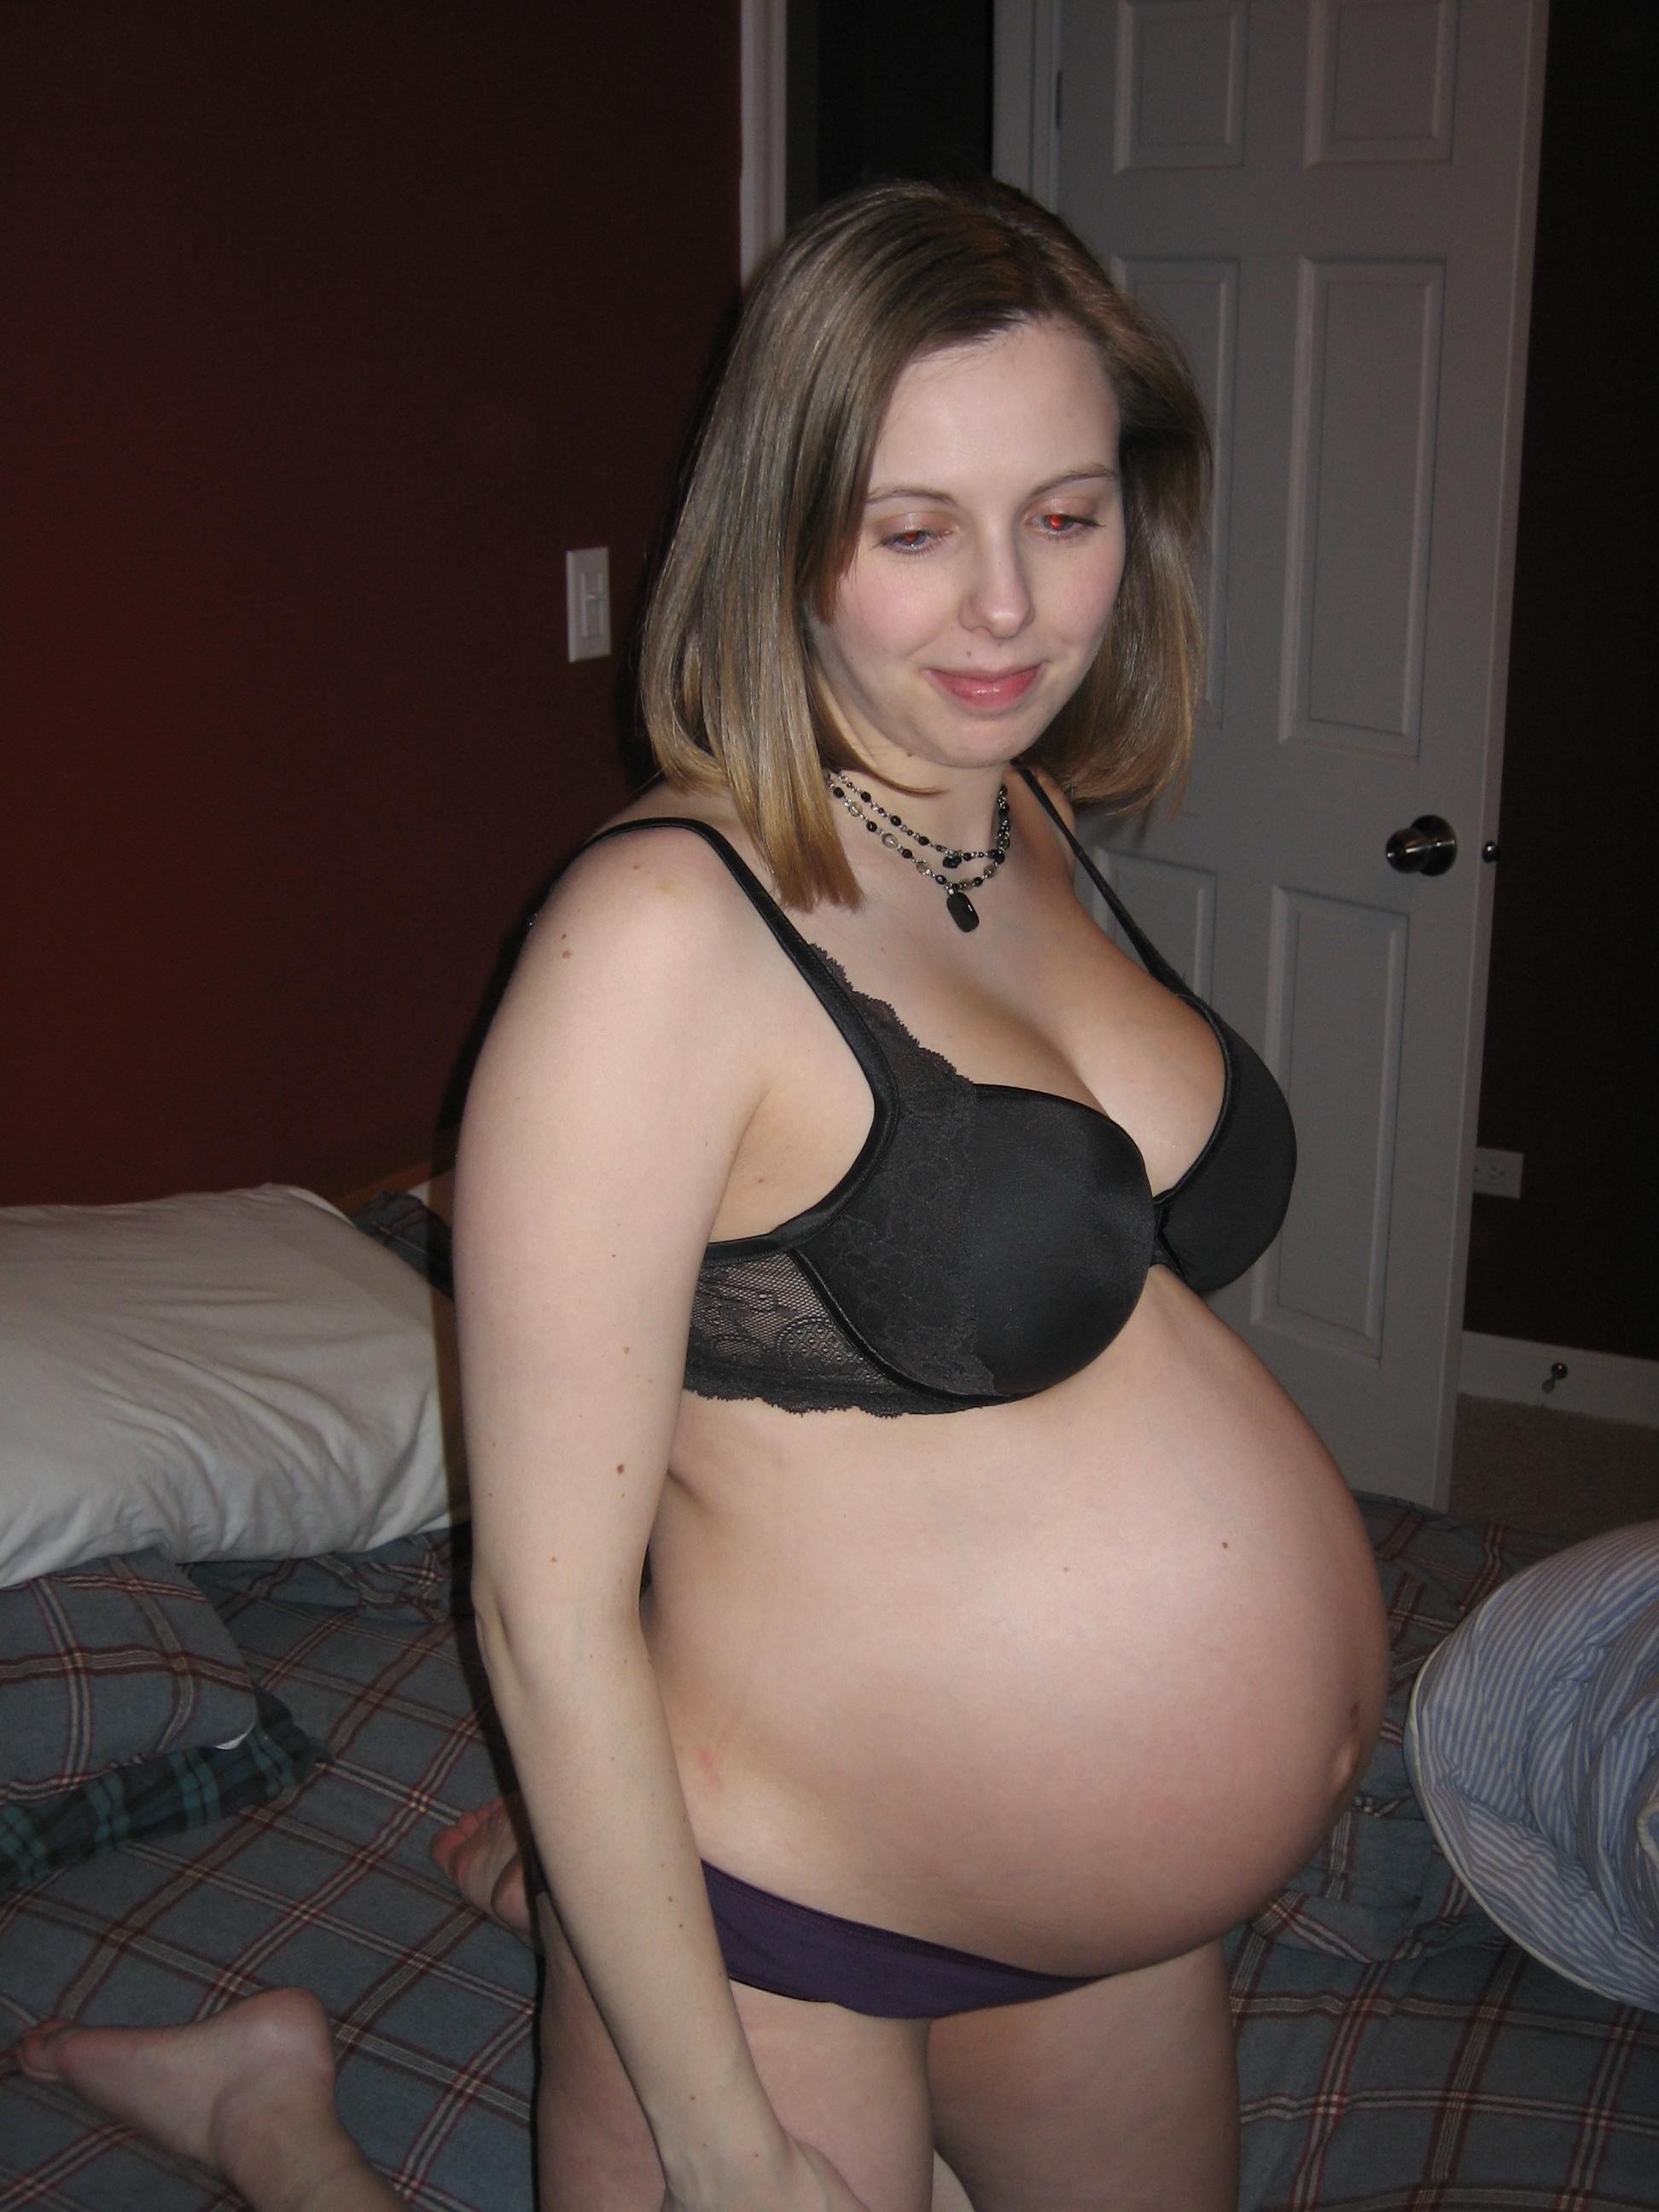 Amateur Pregnant Mature Wife with Tramp Stamp Wearing Pink Panties picture